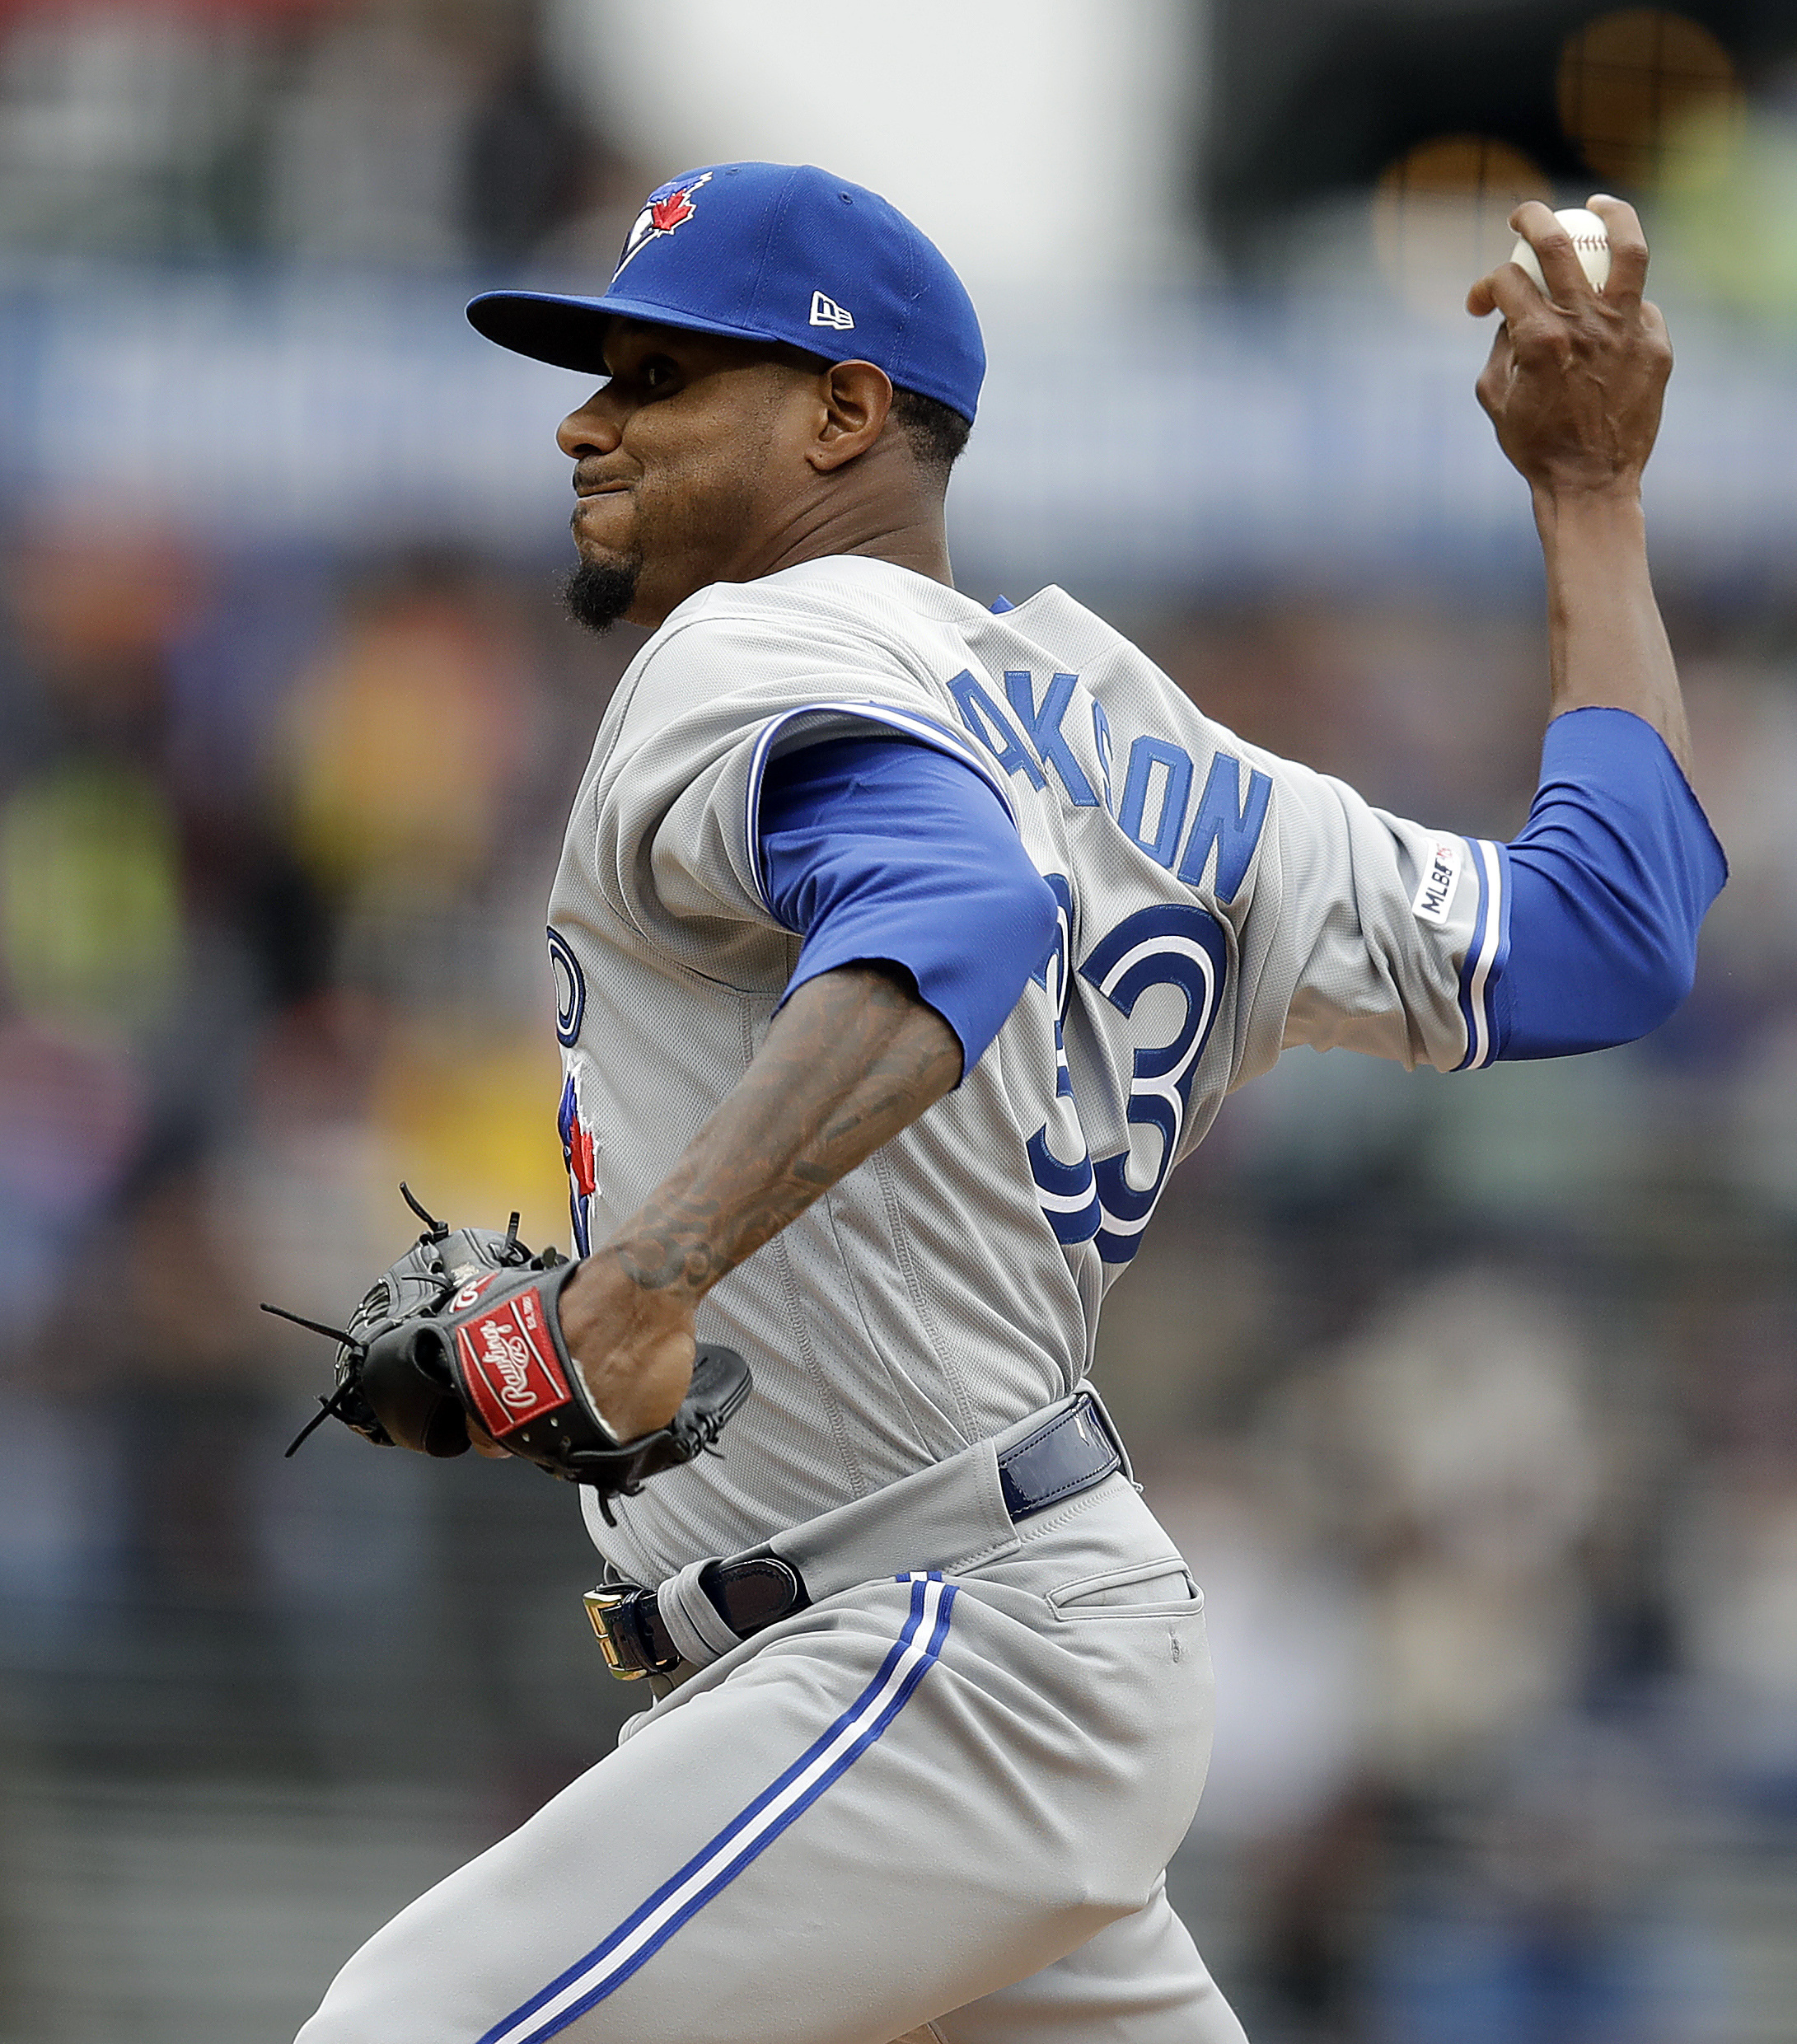 Jackson suits up for record 14th team, Jays lose to Giants